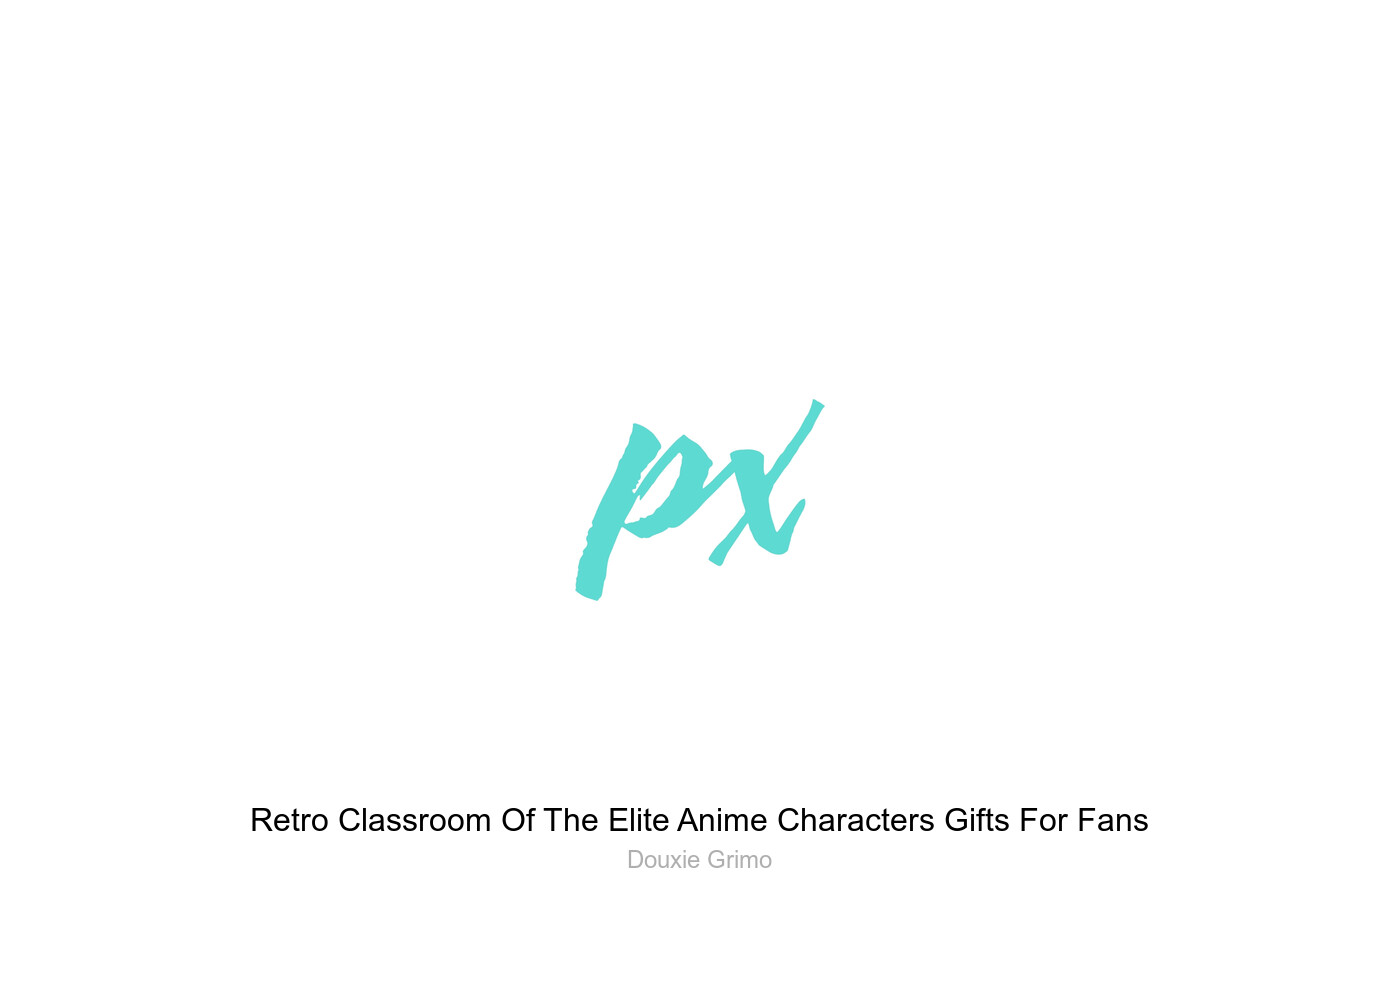 Retro Classroom Of The Elite Anime Characters Gifts For Fans Jigsaw Puzzle  by Douxie Grimo - Pixels